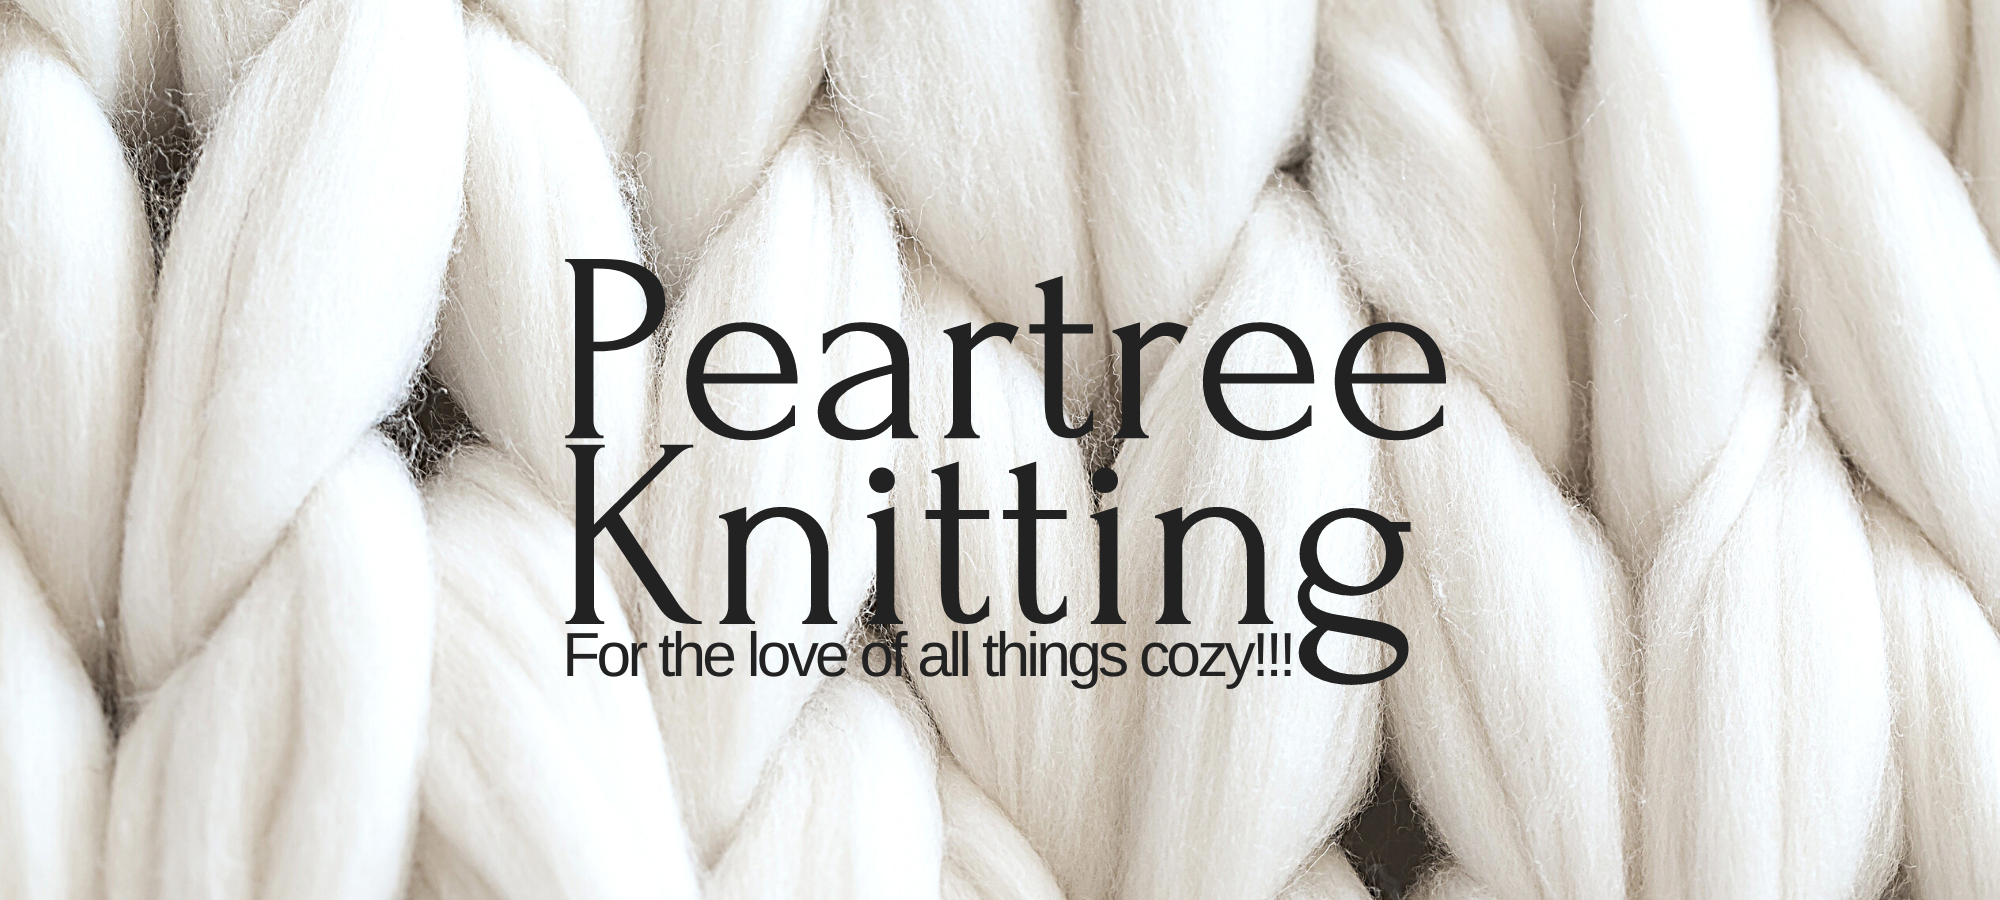 Peartree Knitting